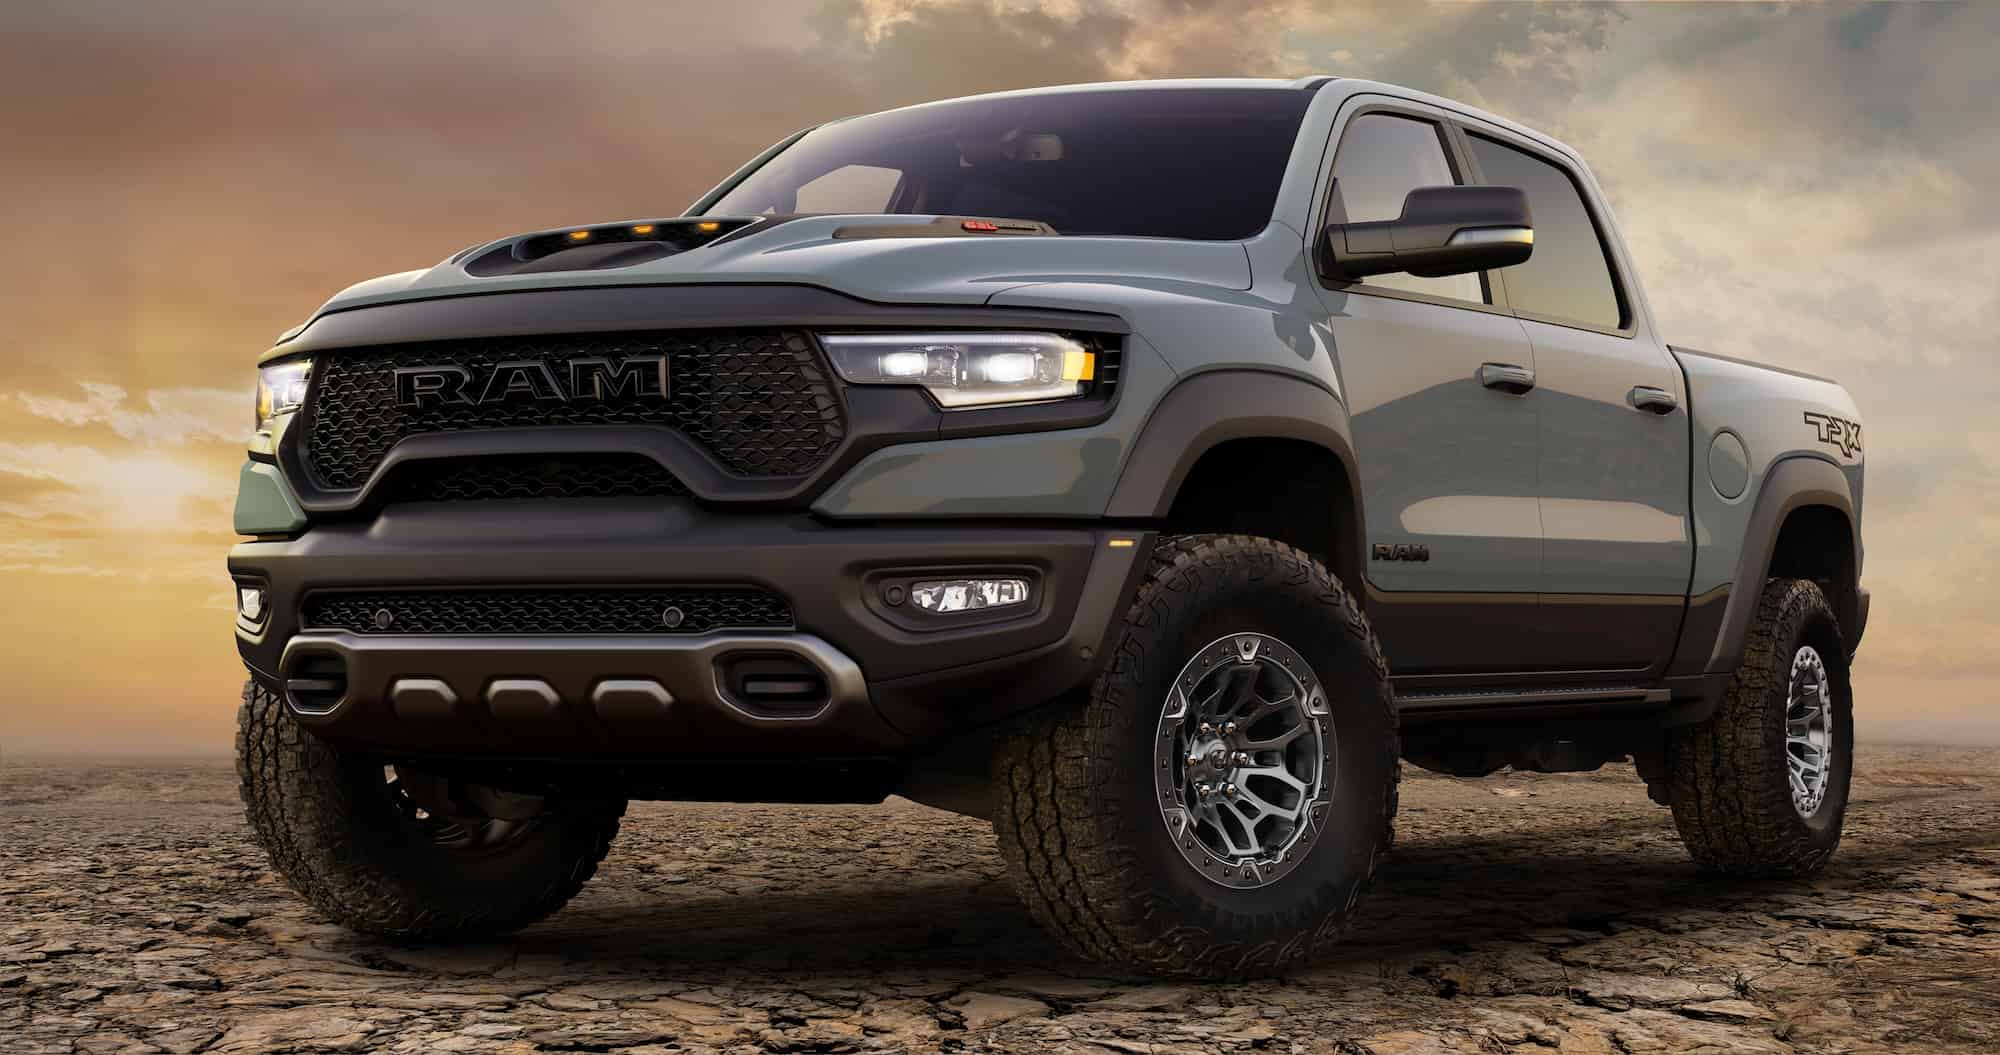 2021 ram 1500 trx ownership costs total more than 6000 per year 1